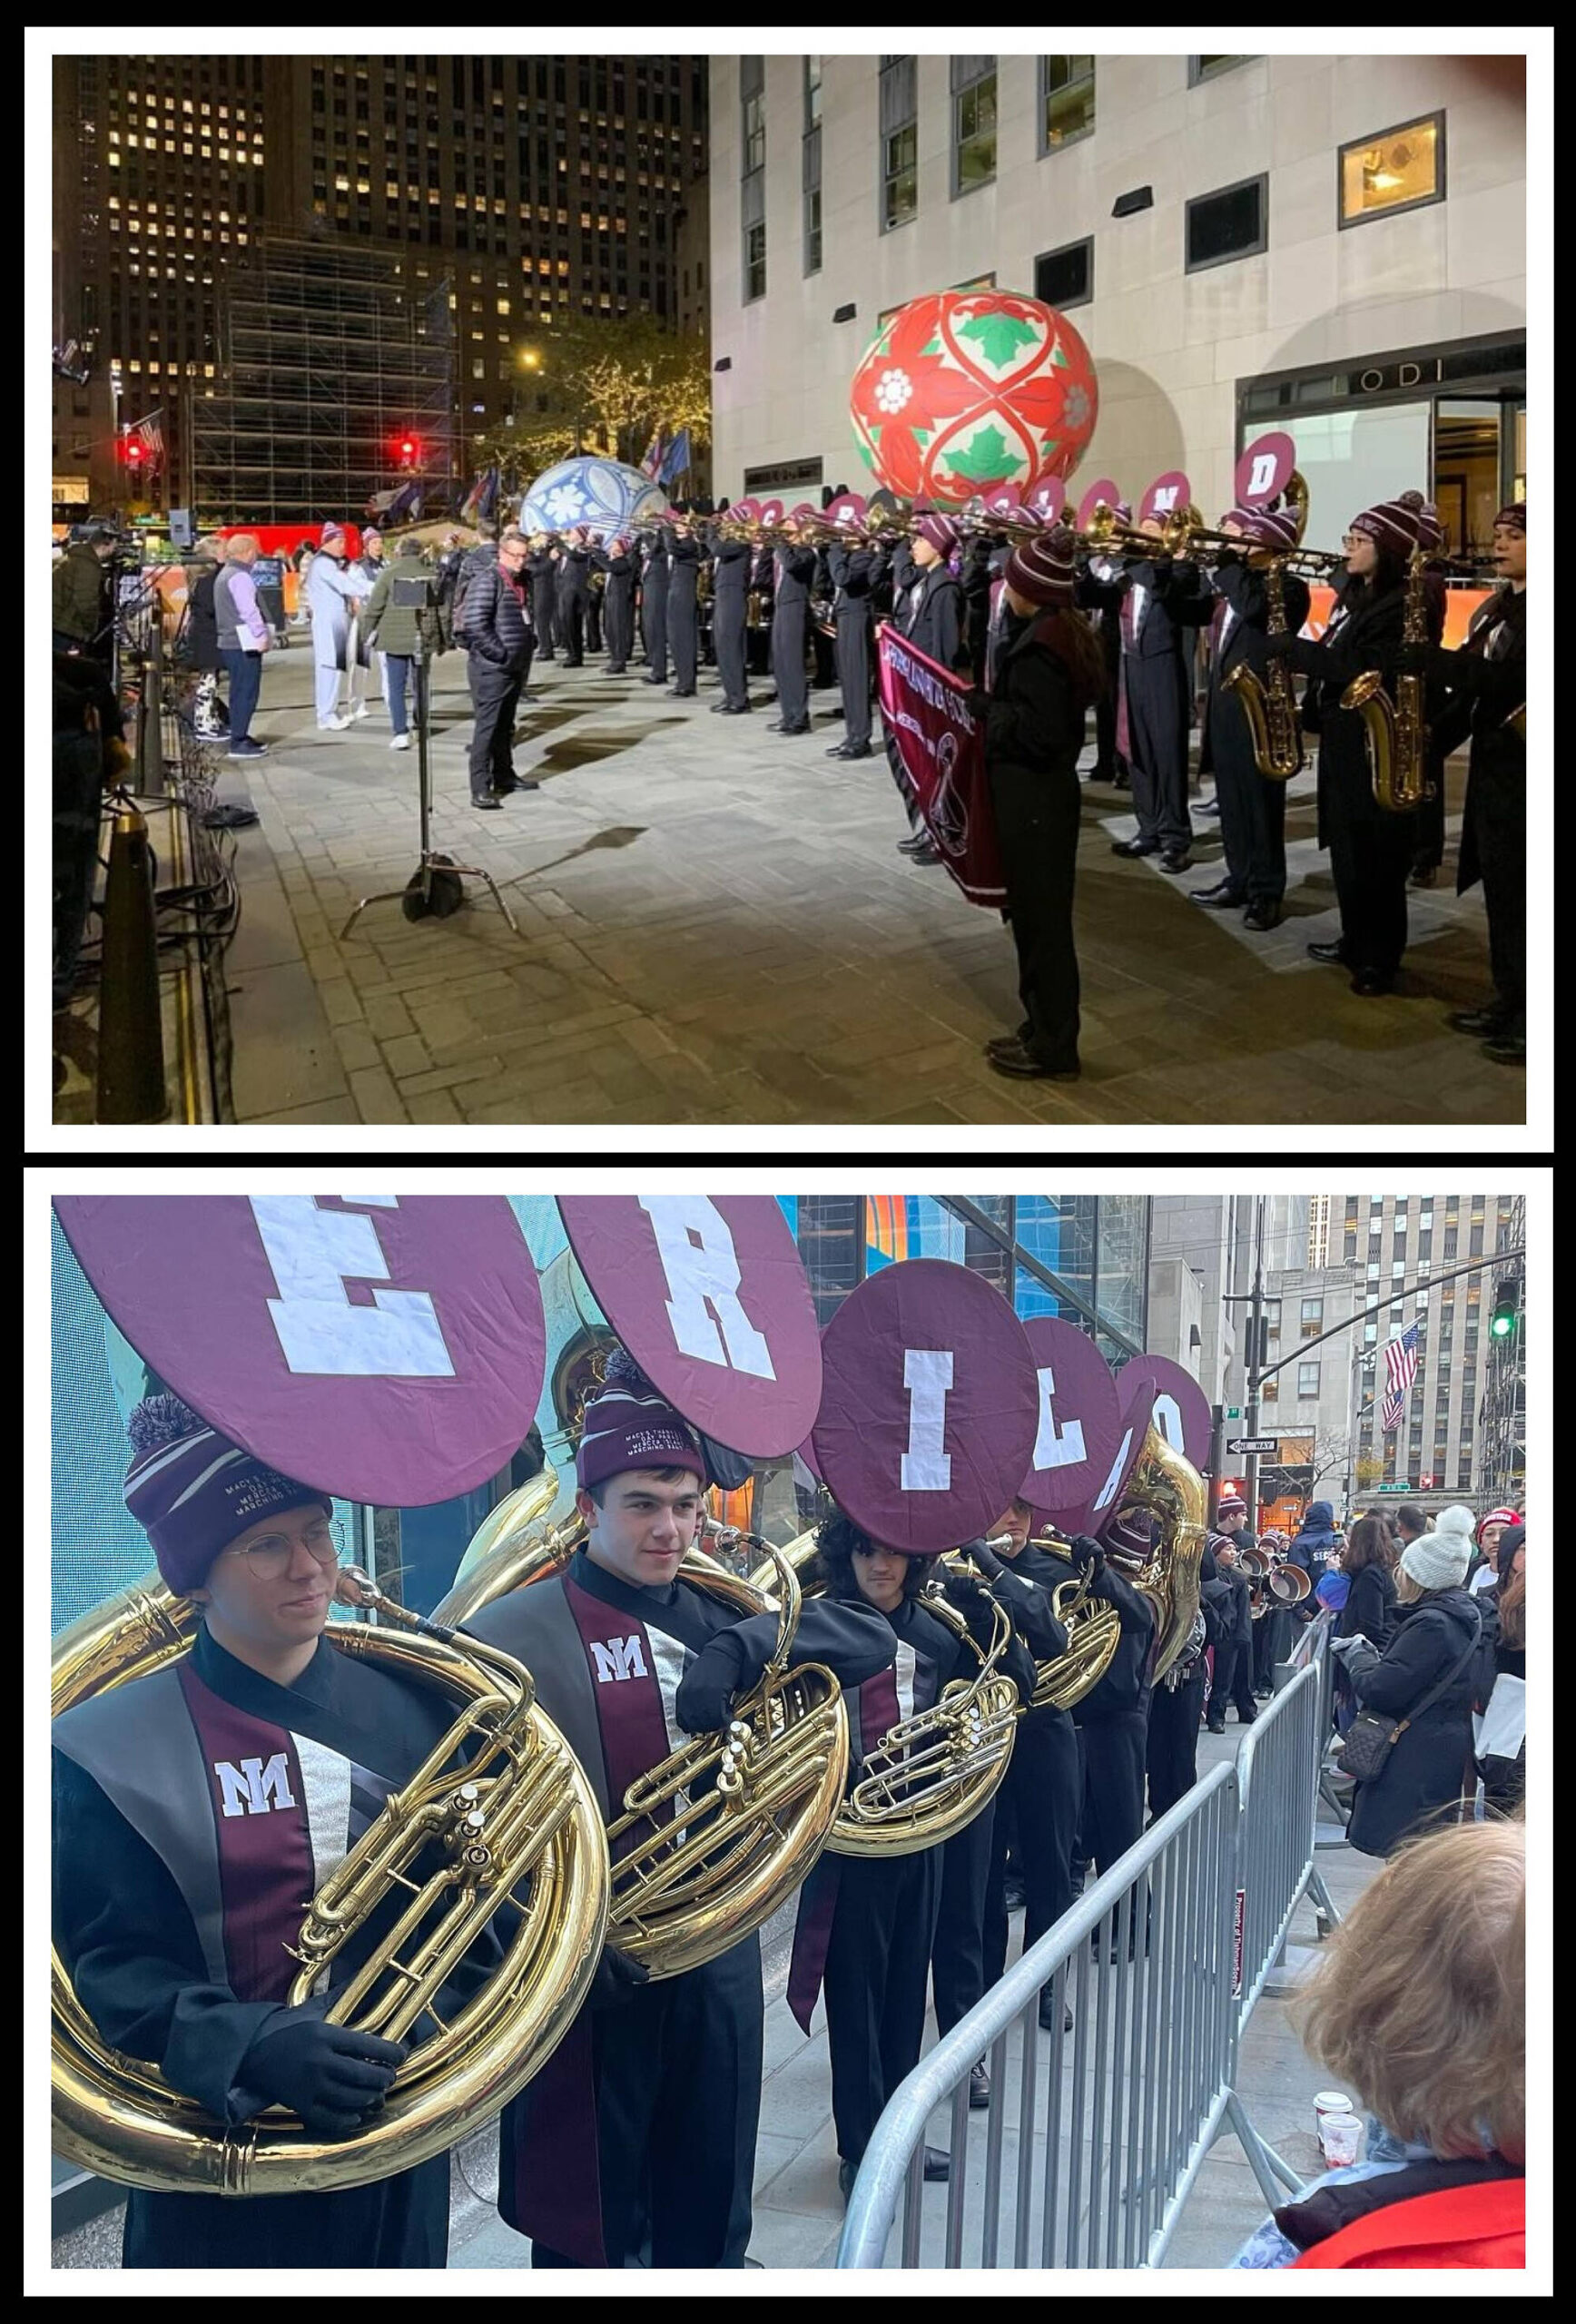 On Monday morning, the Mercer Island High School marching band appeared on the Today Show on NBC to highlight its performance in the 97th Macy’s Thanksgiving Day Parade in New York City. Here, the band prepares for its time in the spotlight. Photos courtesy of the Mercer Island School District